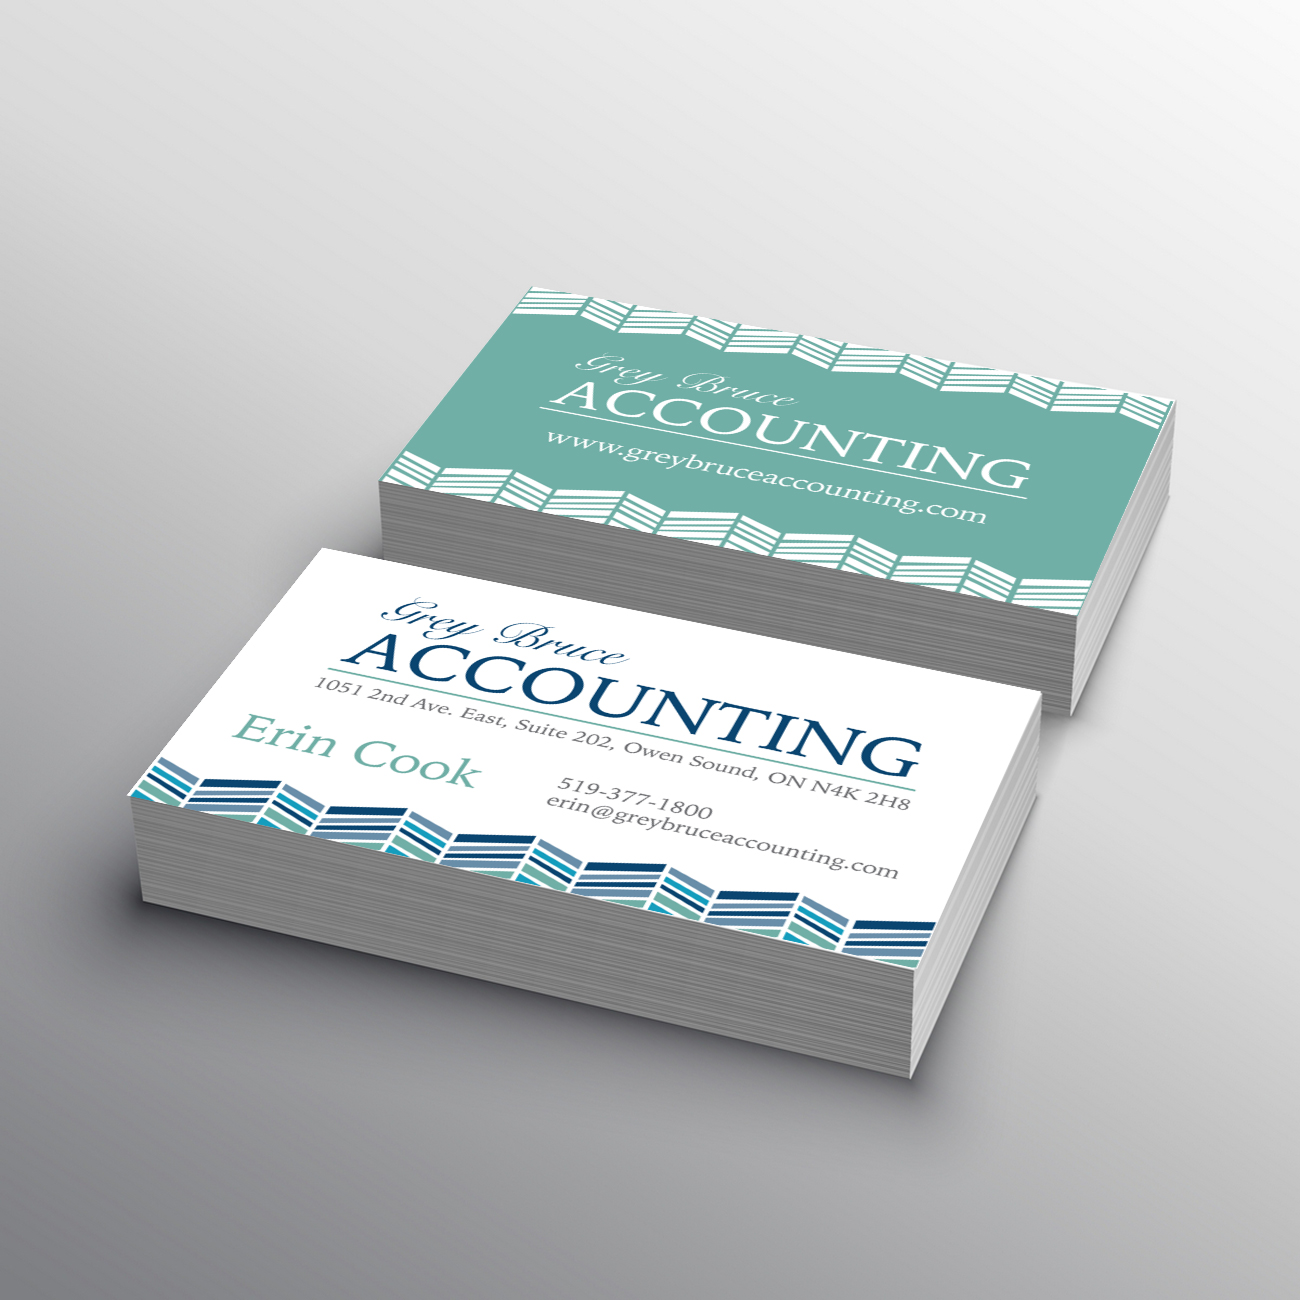 accounting business cards 1